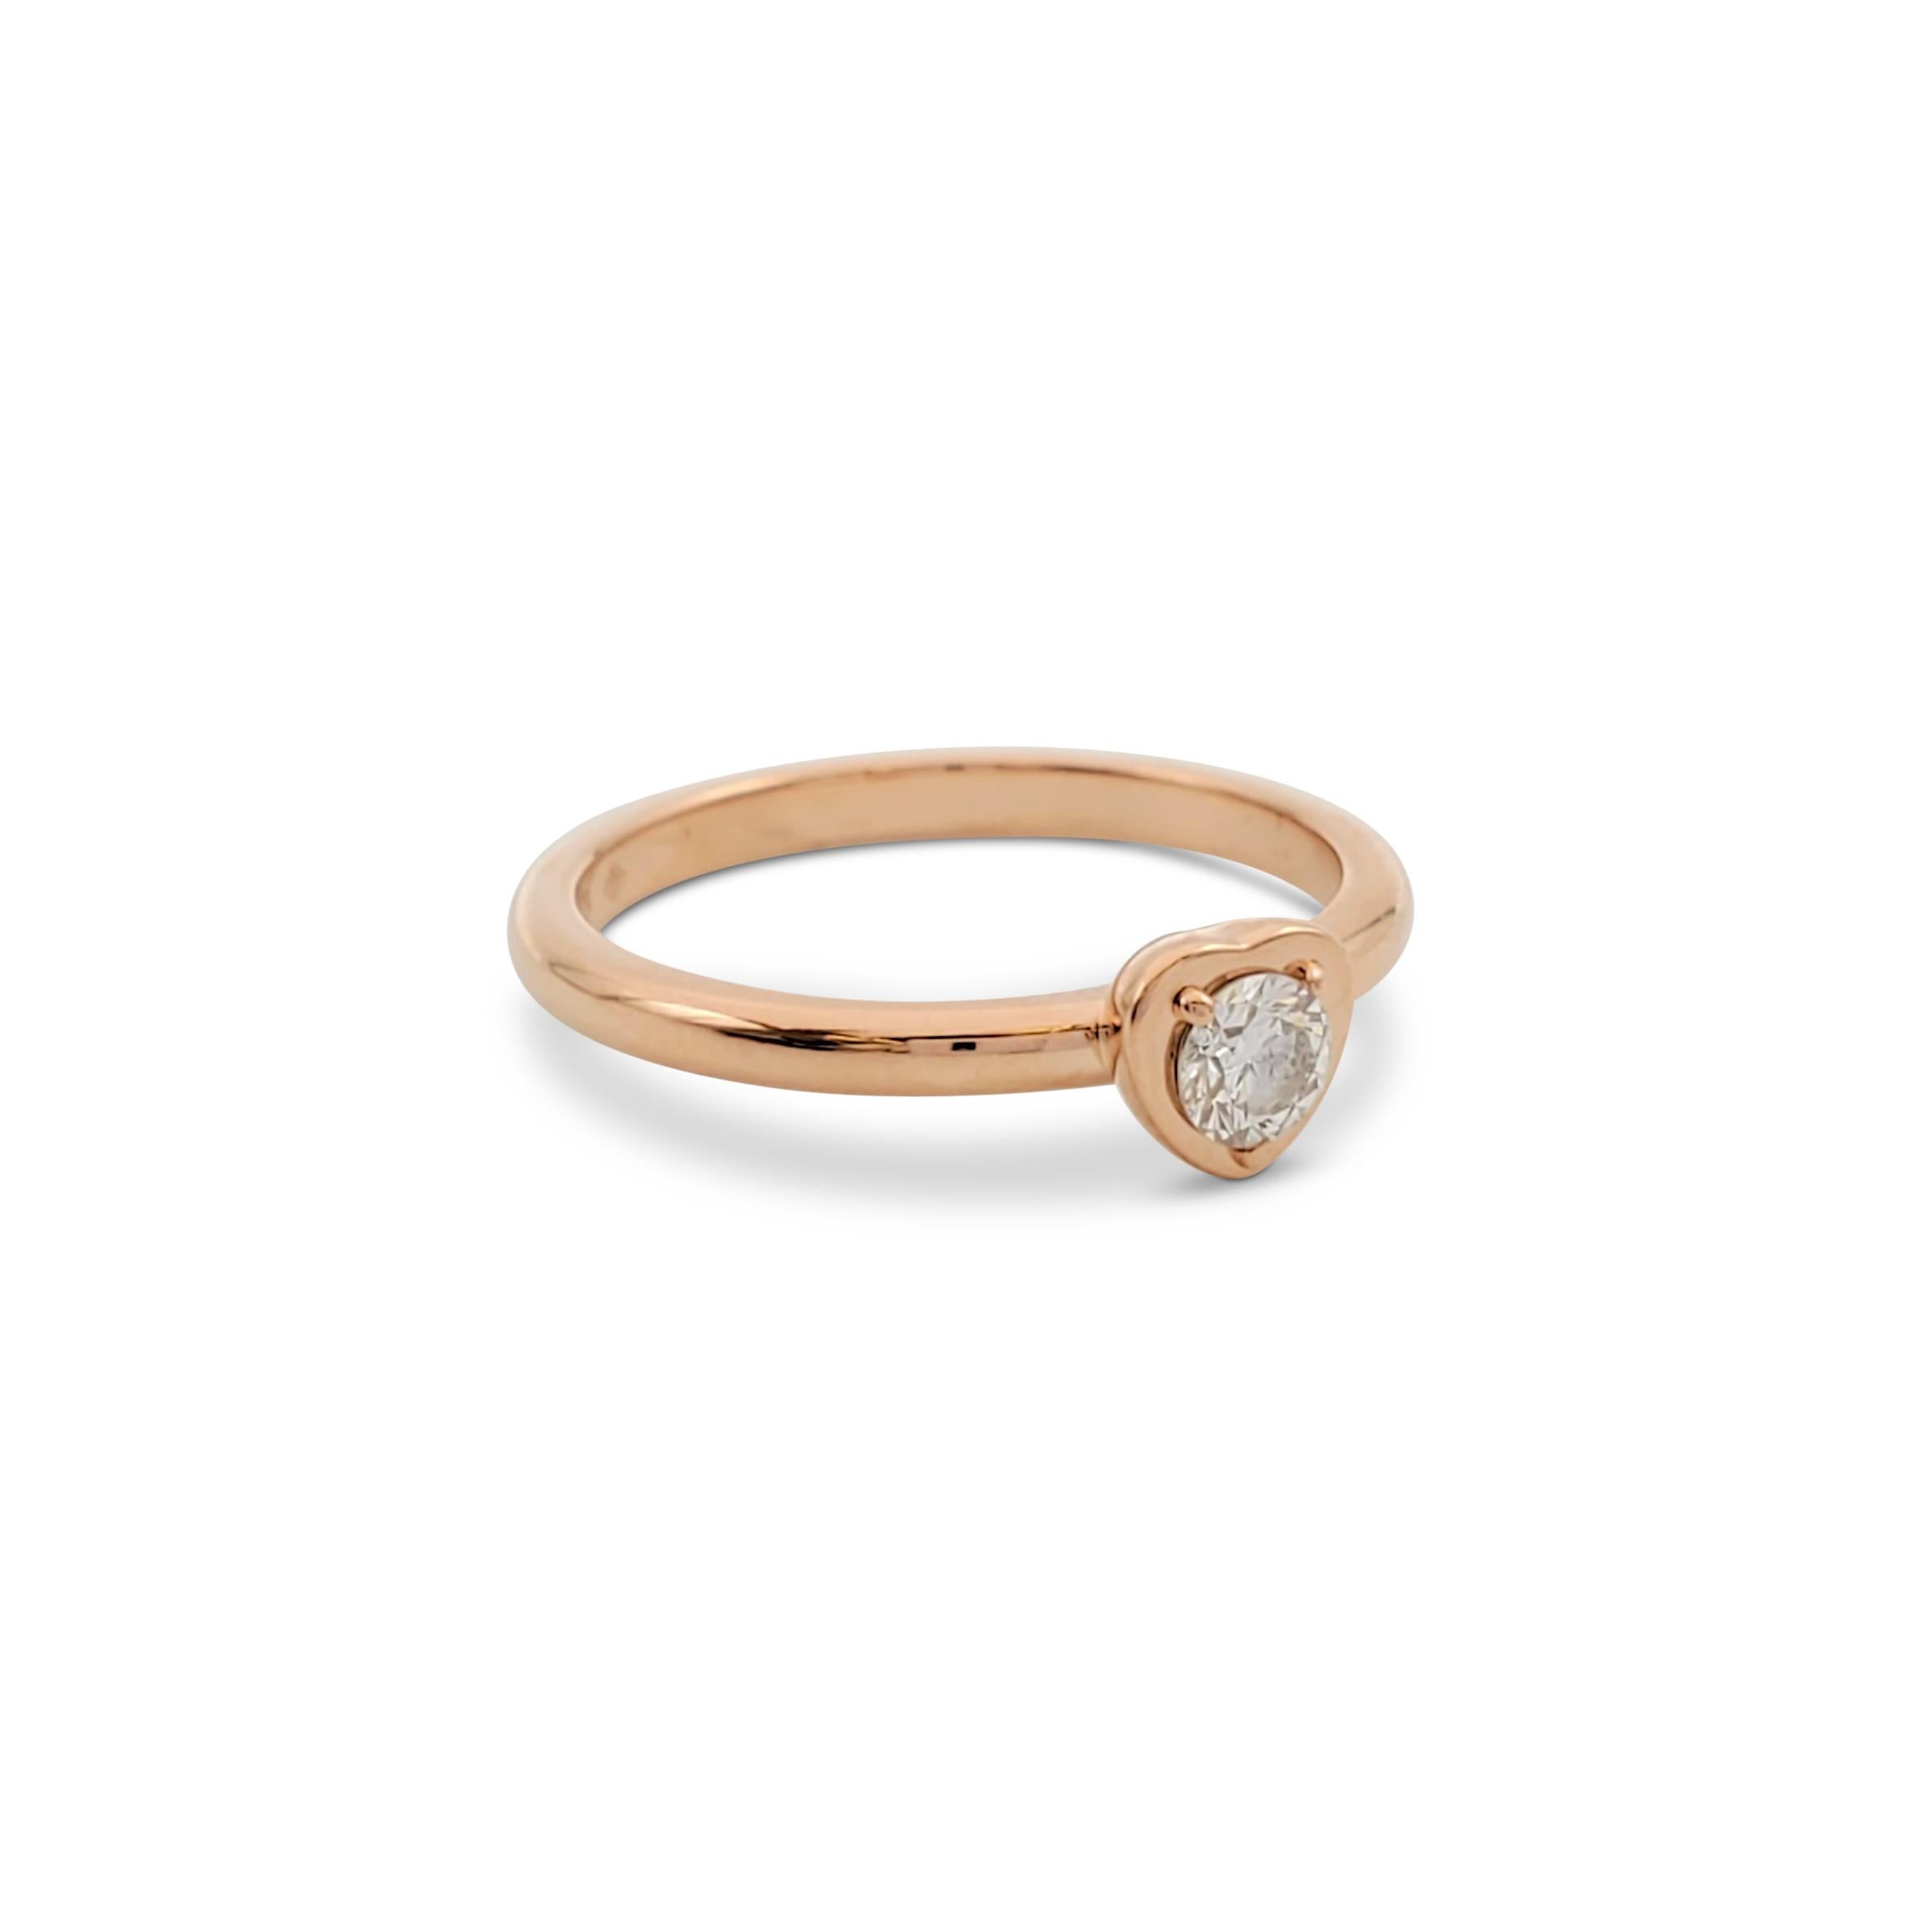 Authentic Cartier ring crafted in 18 karat rose gold centers on a single round brilliant cut diamond weighing an estimated 0.15 carats (E-F, VS) set in a heart-shaped mounting. Signed Cartier, 750, 49, with serial number and hallmark. Ring size 49